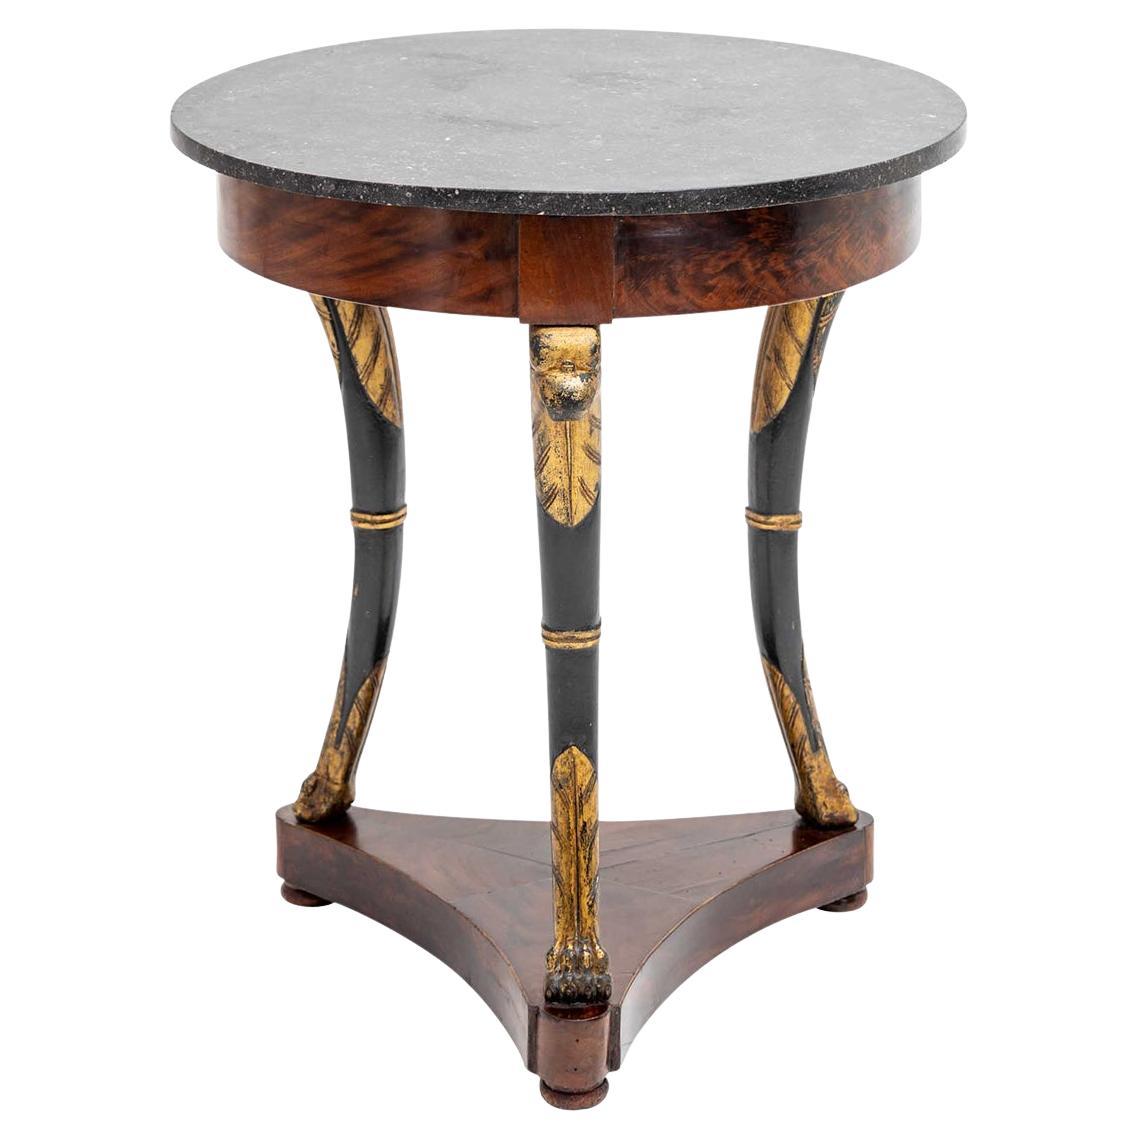 19th Century French Empire Round Mahogany Side Table - Antique Marble Table